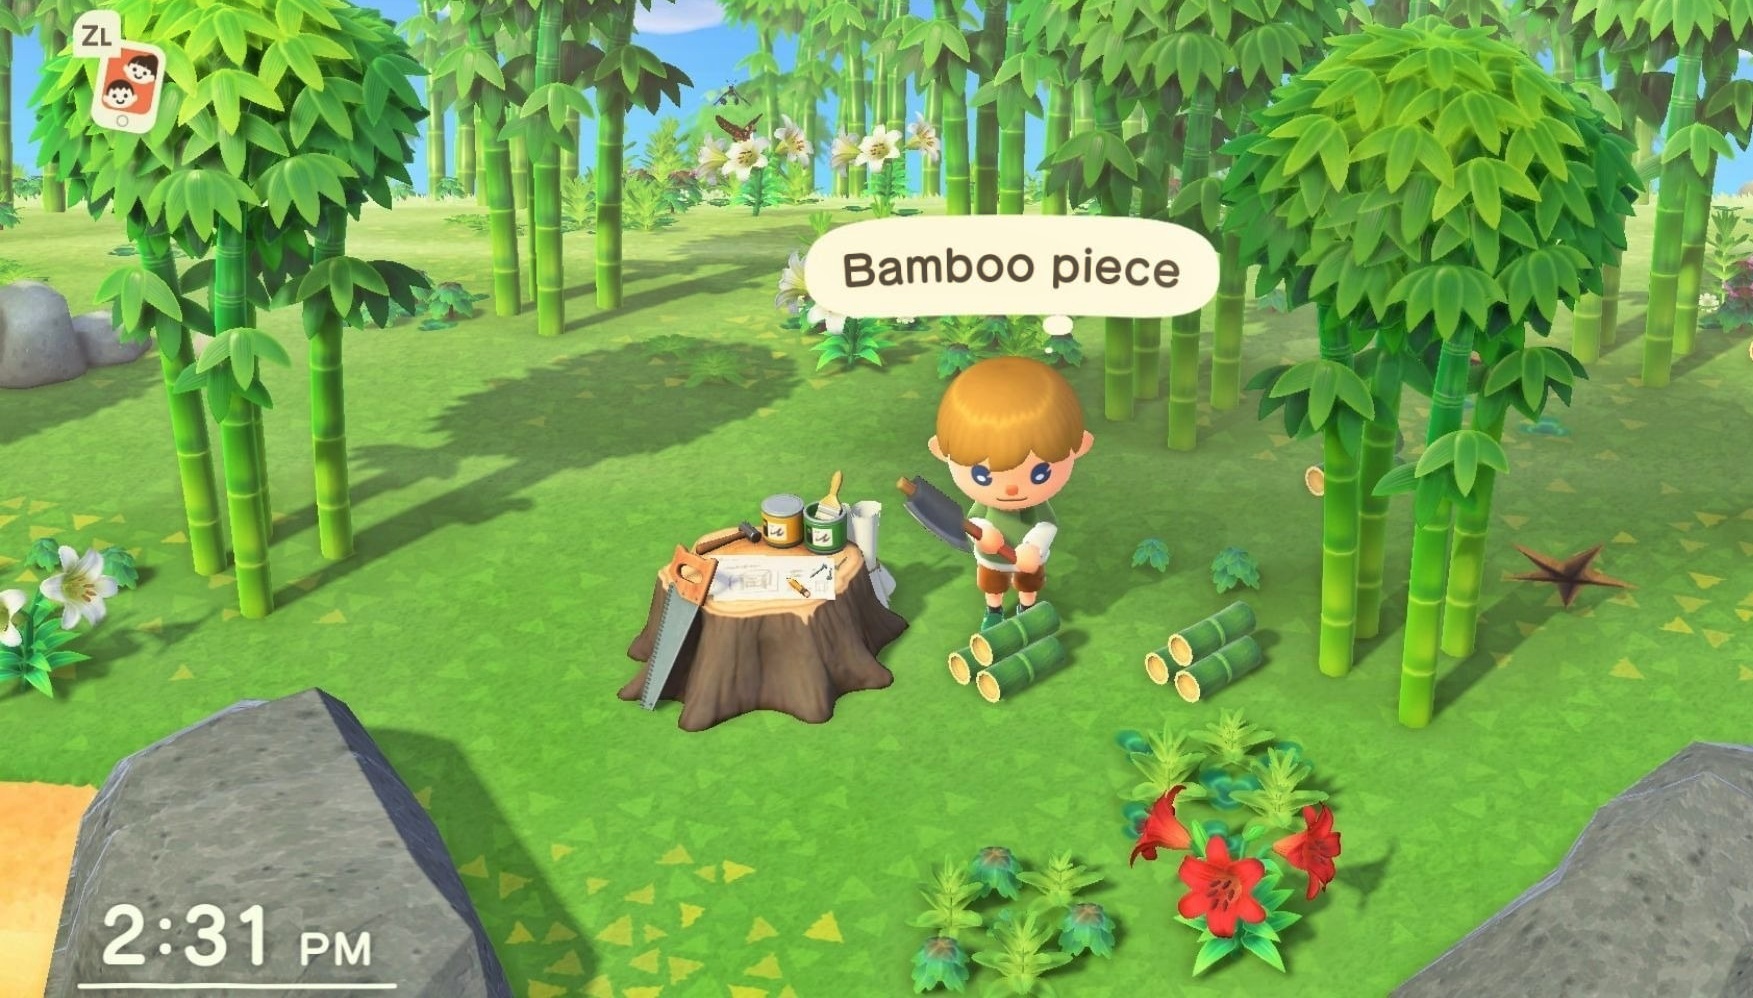 How To Get Bamboo In Animal Crossing: New Horizons